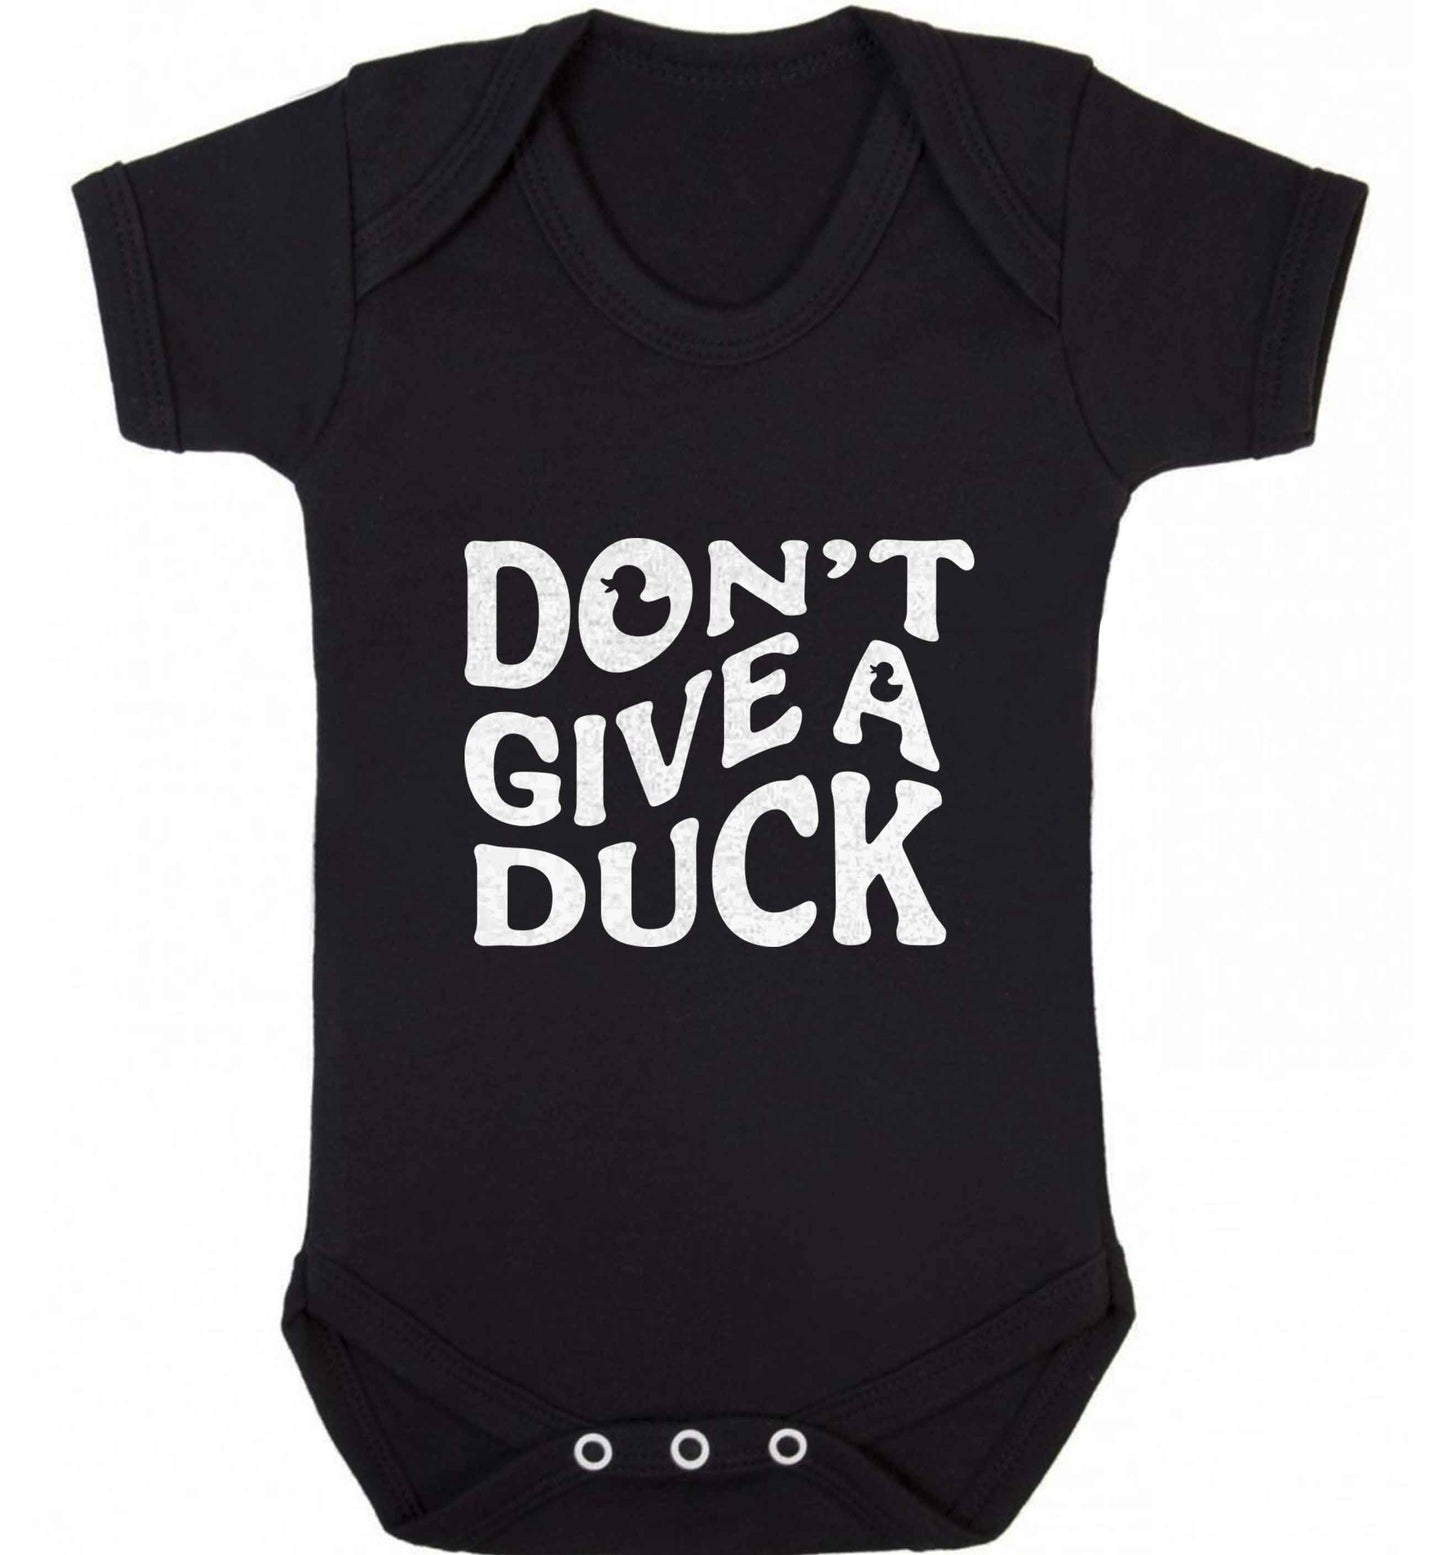 Don't give a duck baby vest black 18-24 months